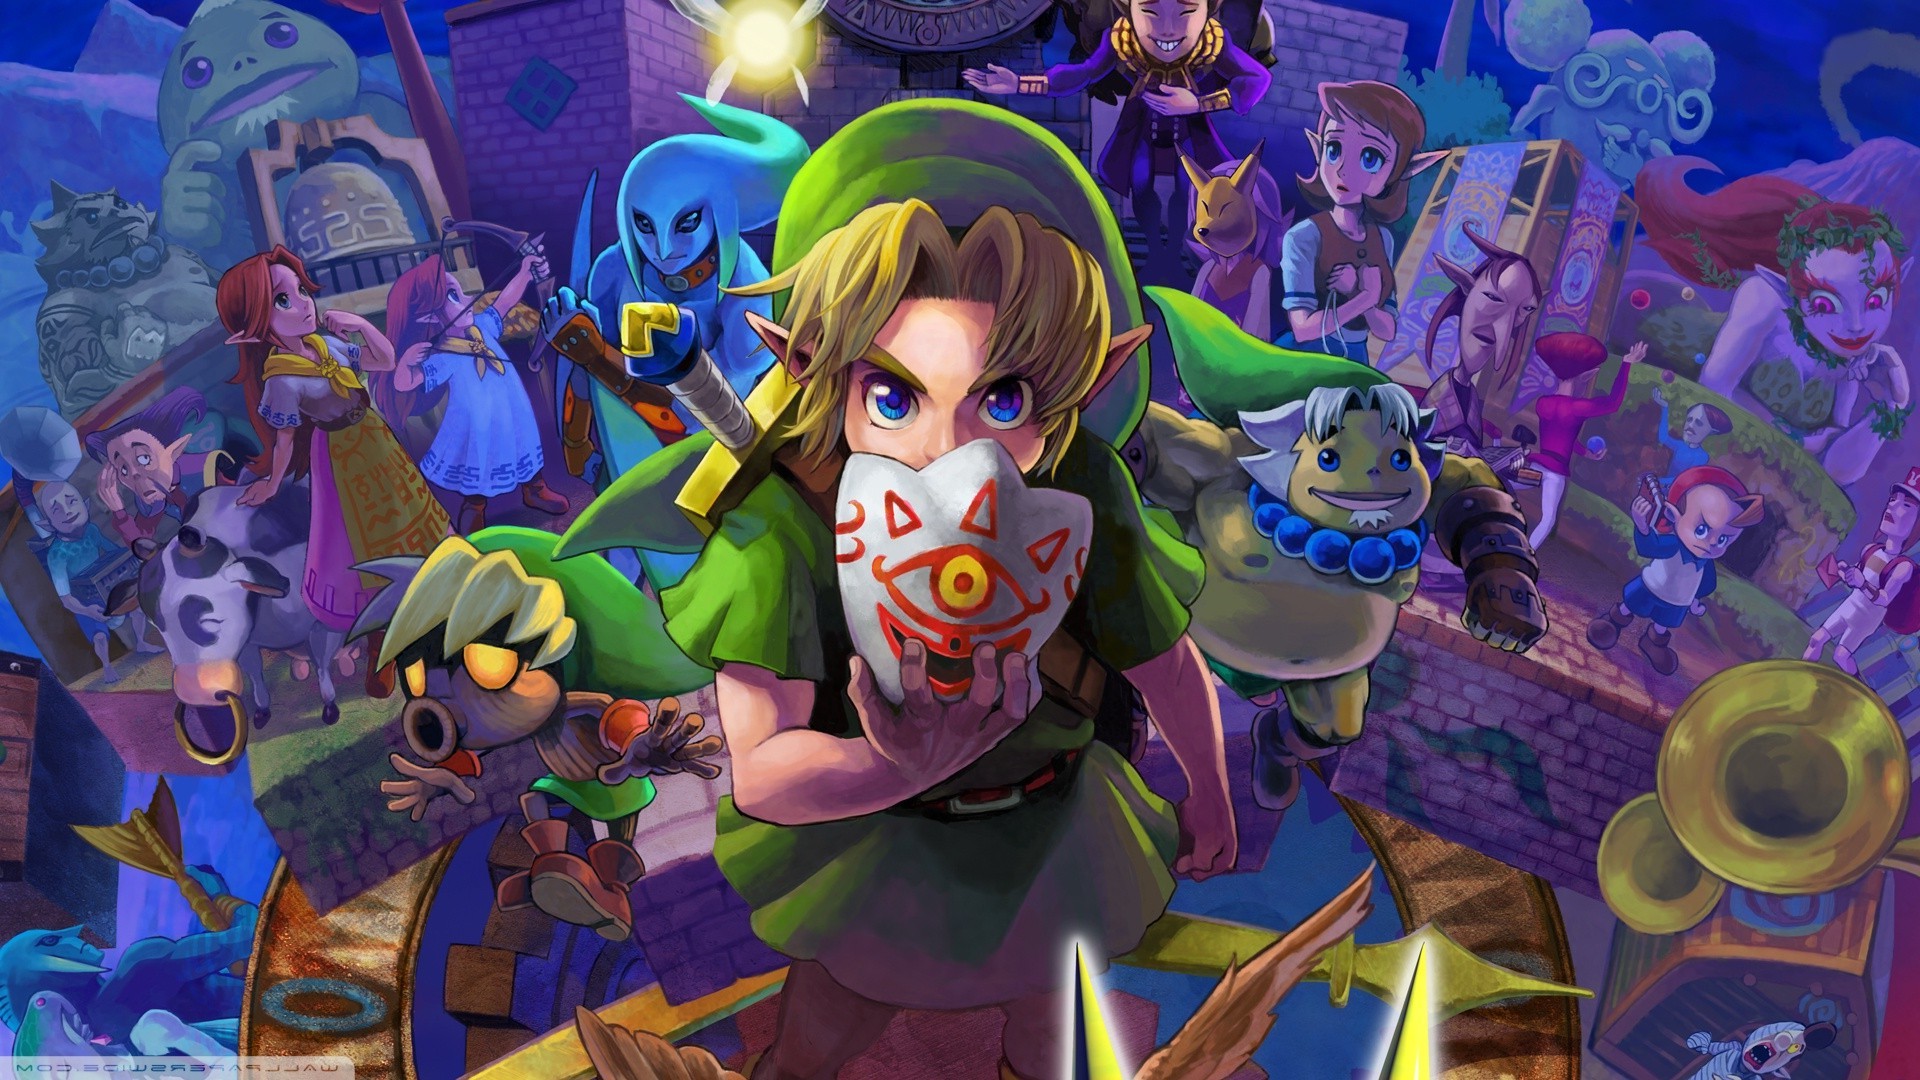 8. "Link with Blue Hair" by Majora's Mask - wide 1